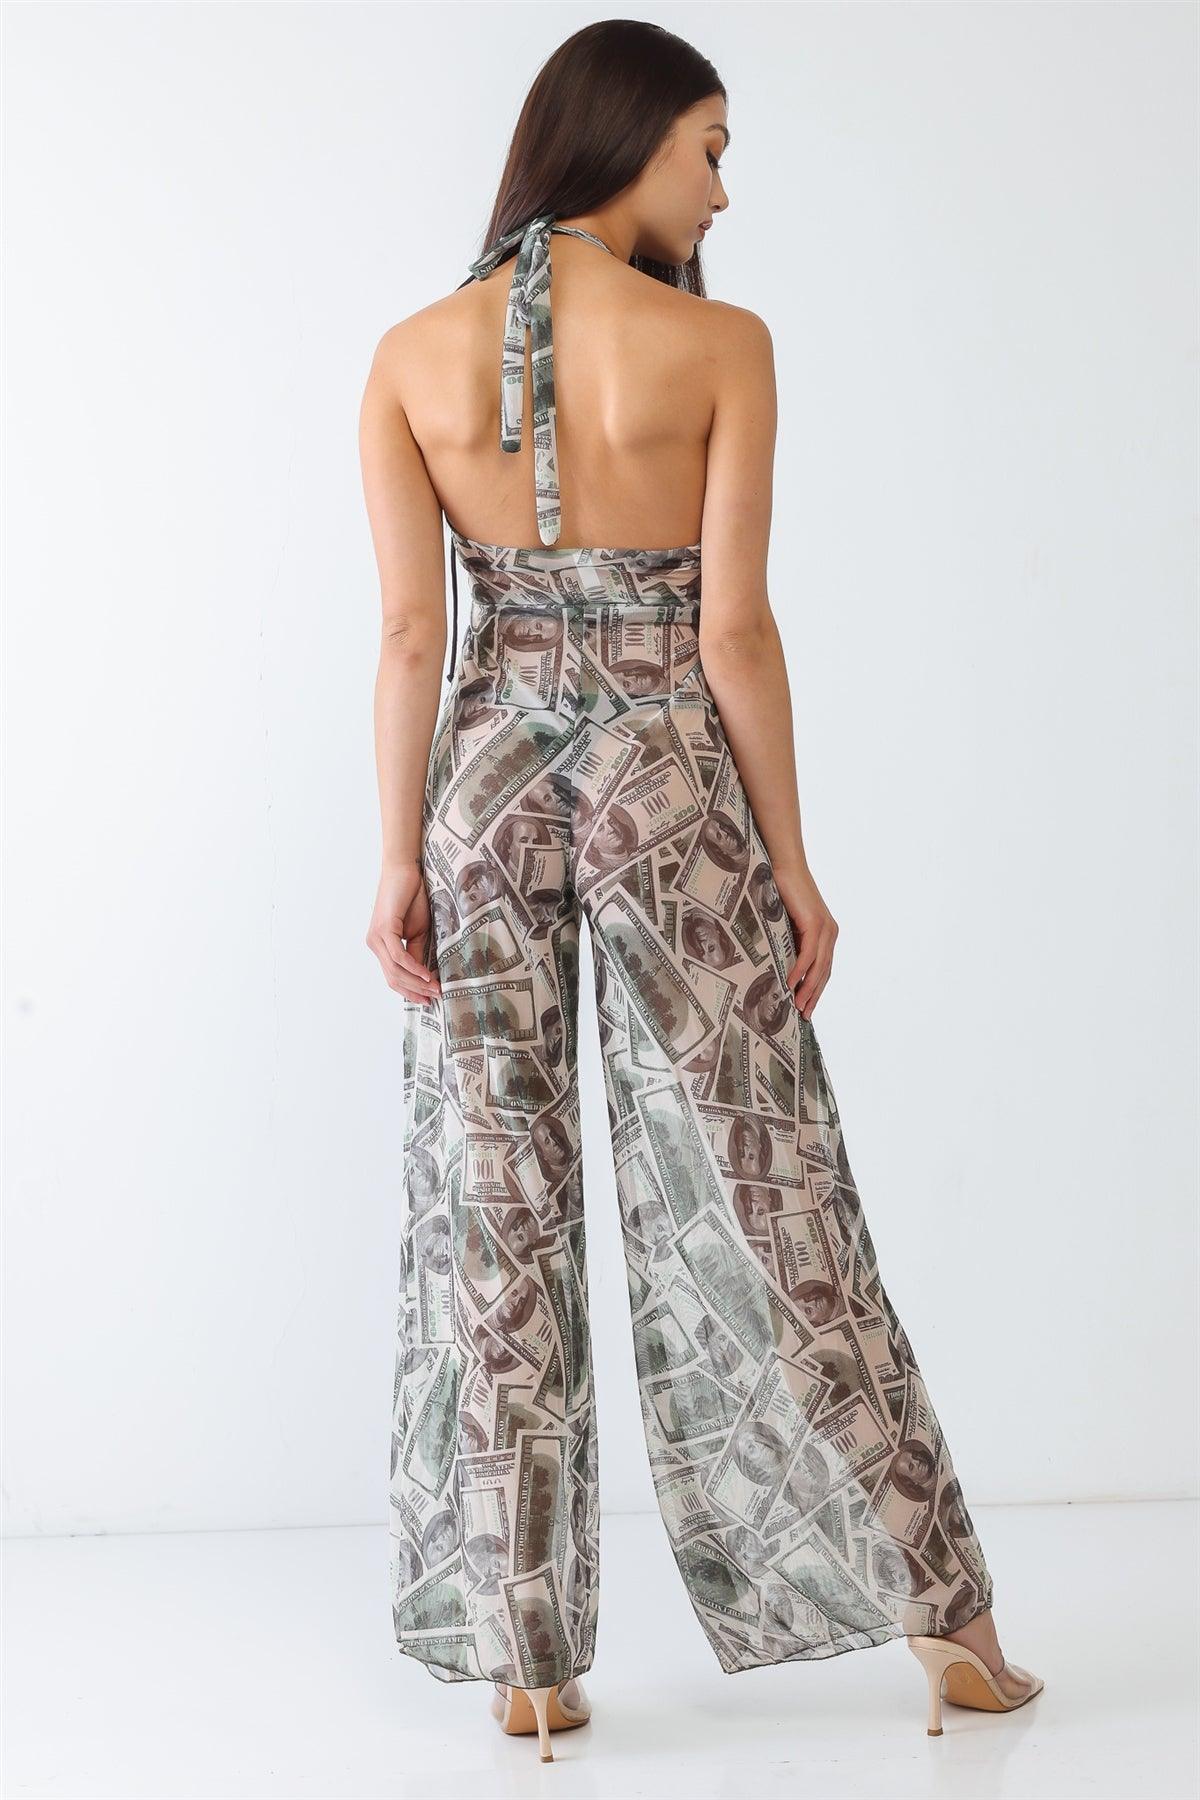 Green Money Dolla Signs Print V-Neck Sleeveless Wide Leg Sheer Jumpsuit Cover Up